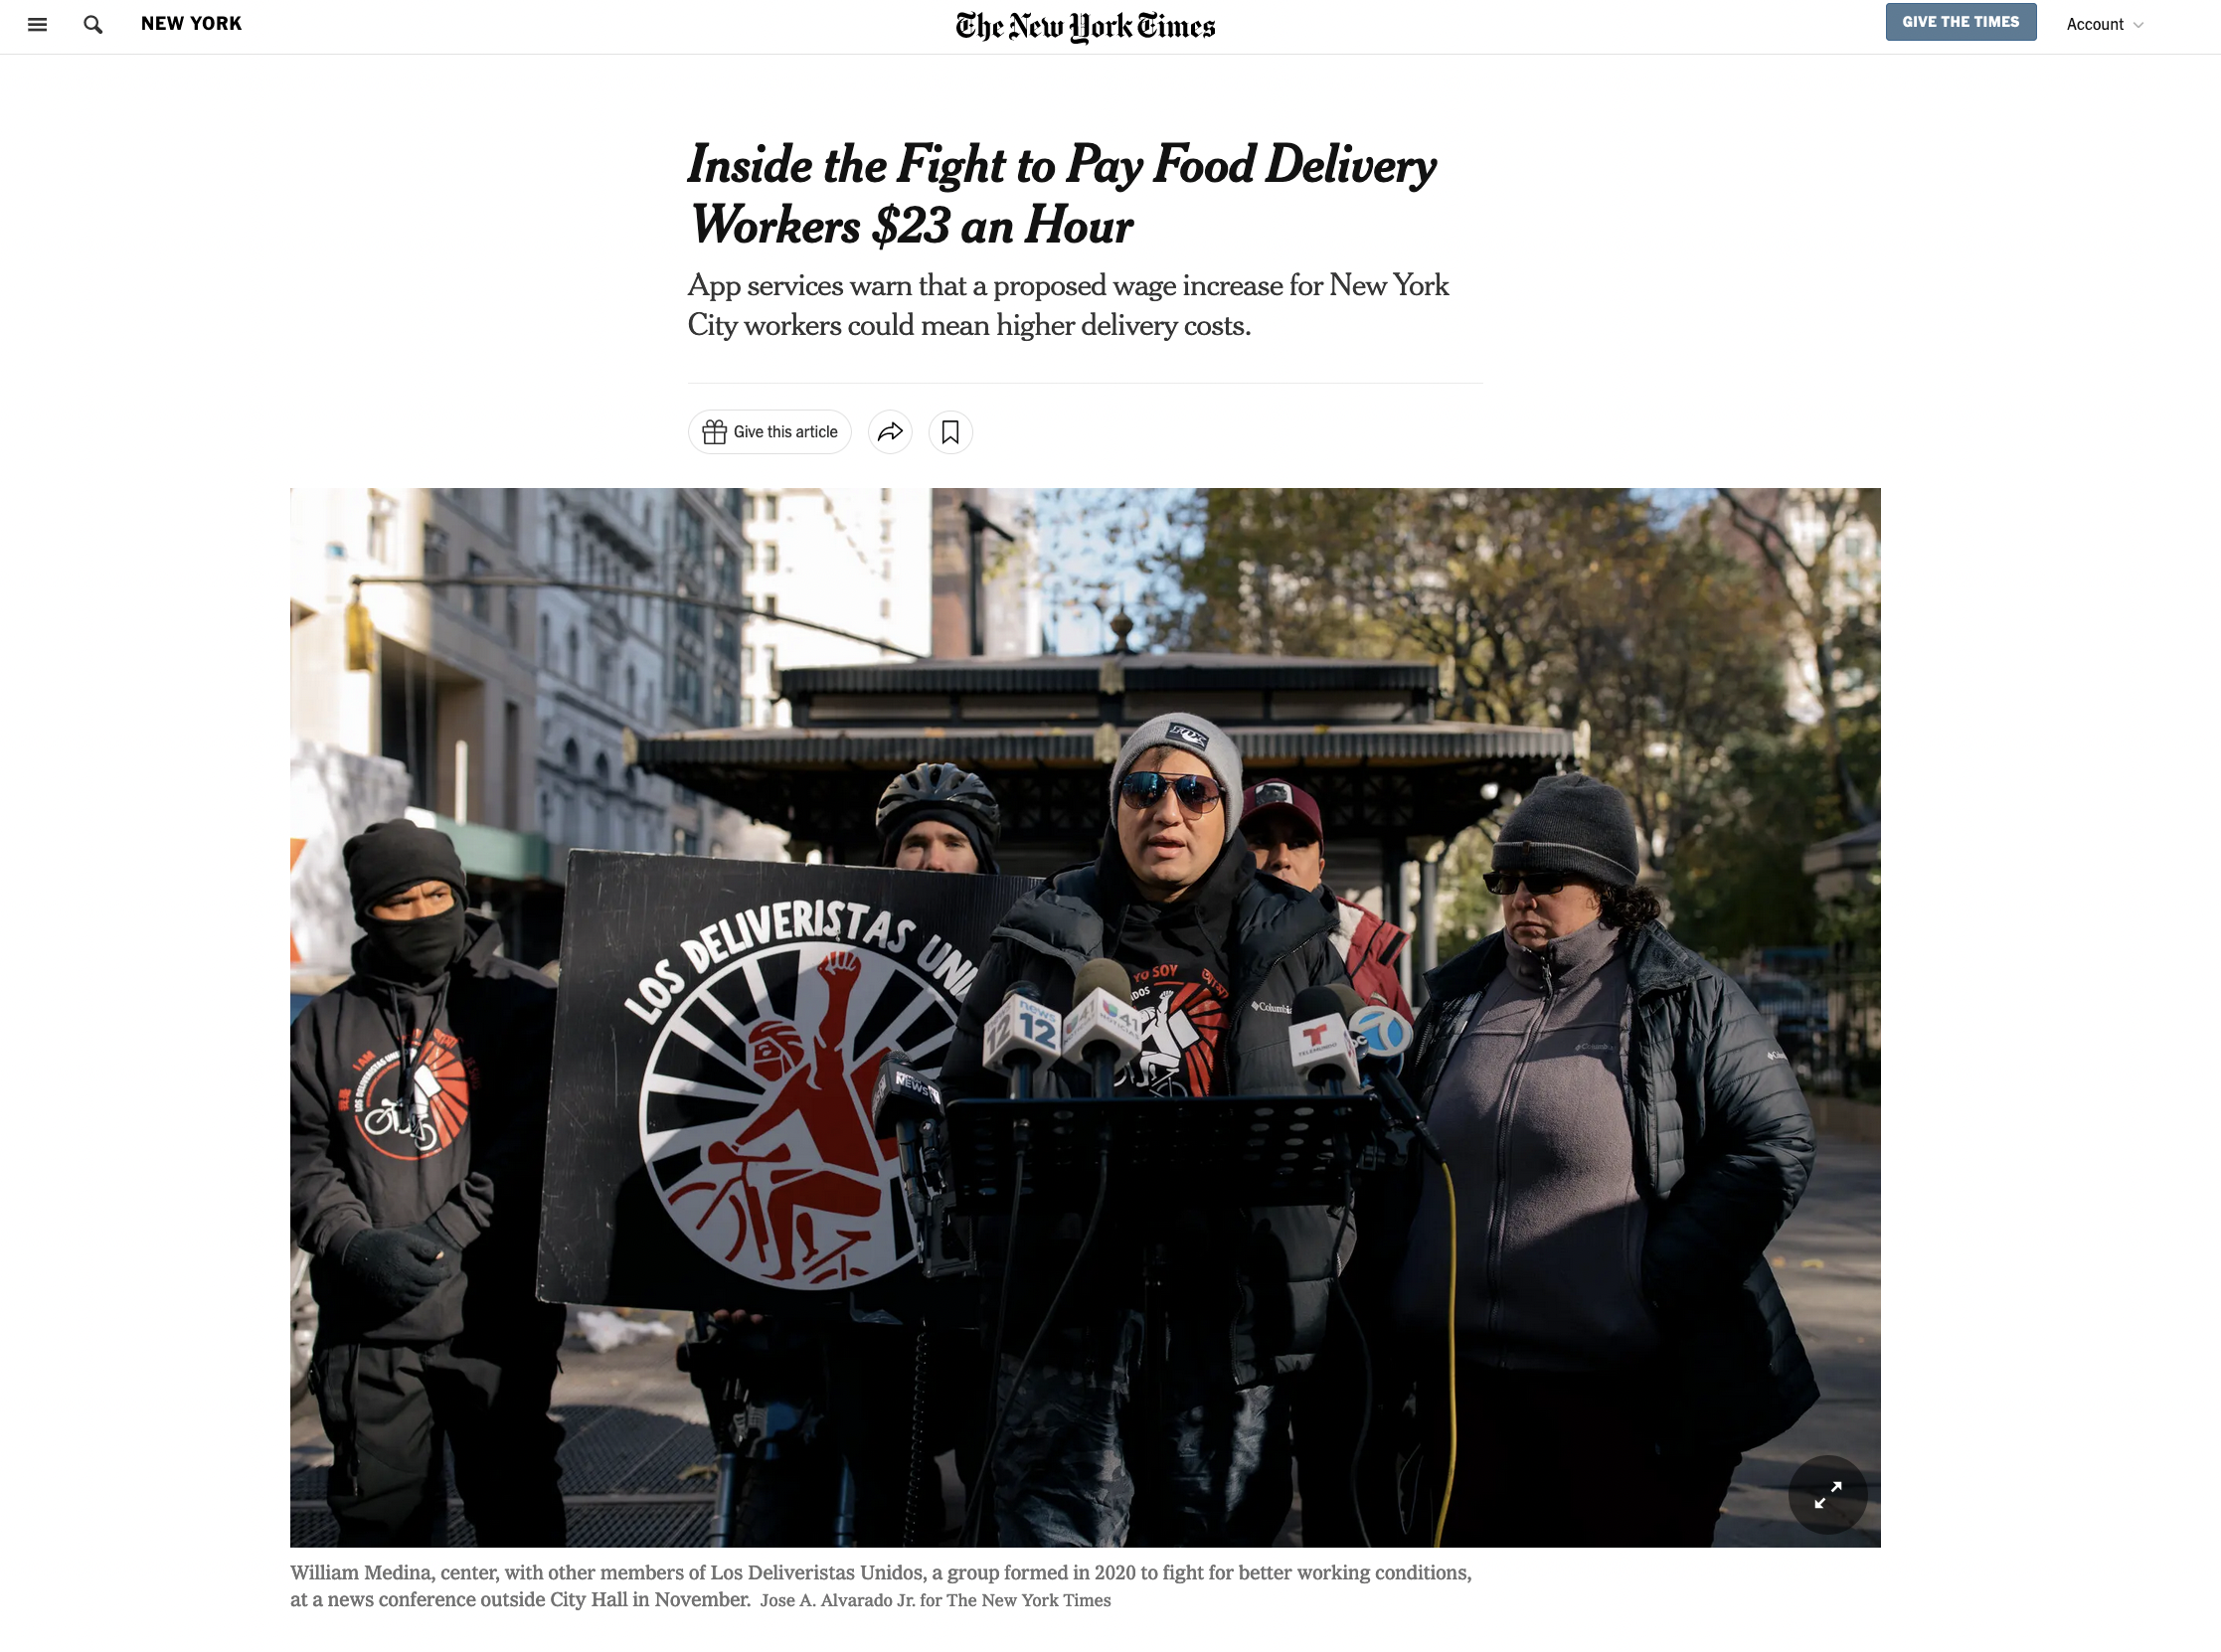 Thumbnail of for The New York Times: Inside the Fight to Pay Food Delivery Workers $23 an Hour